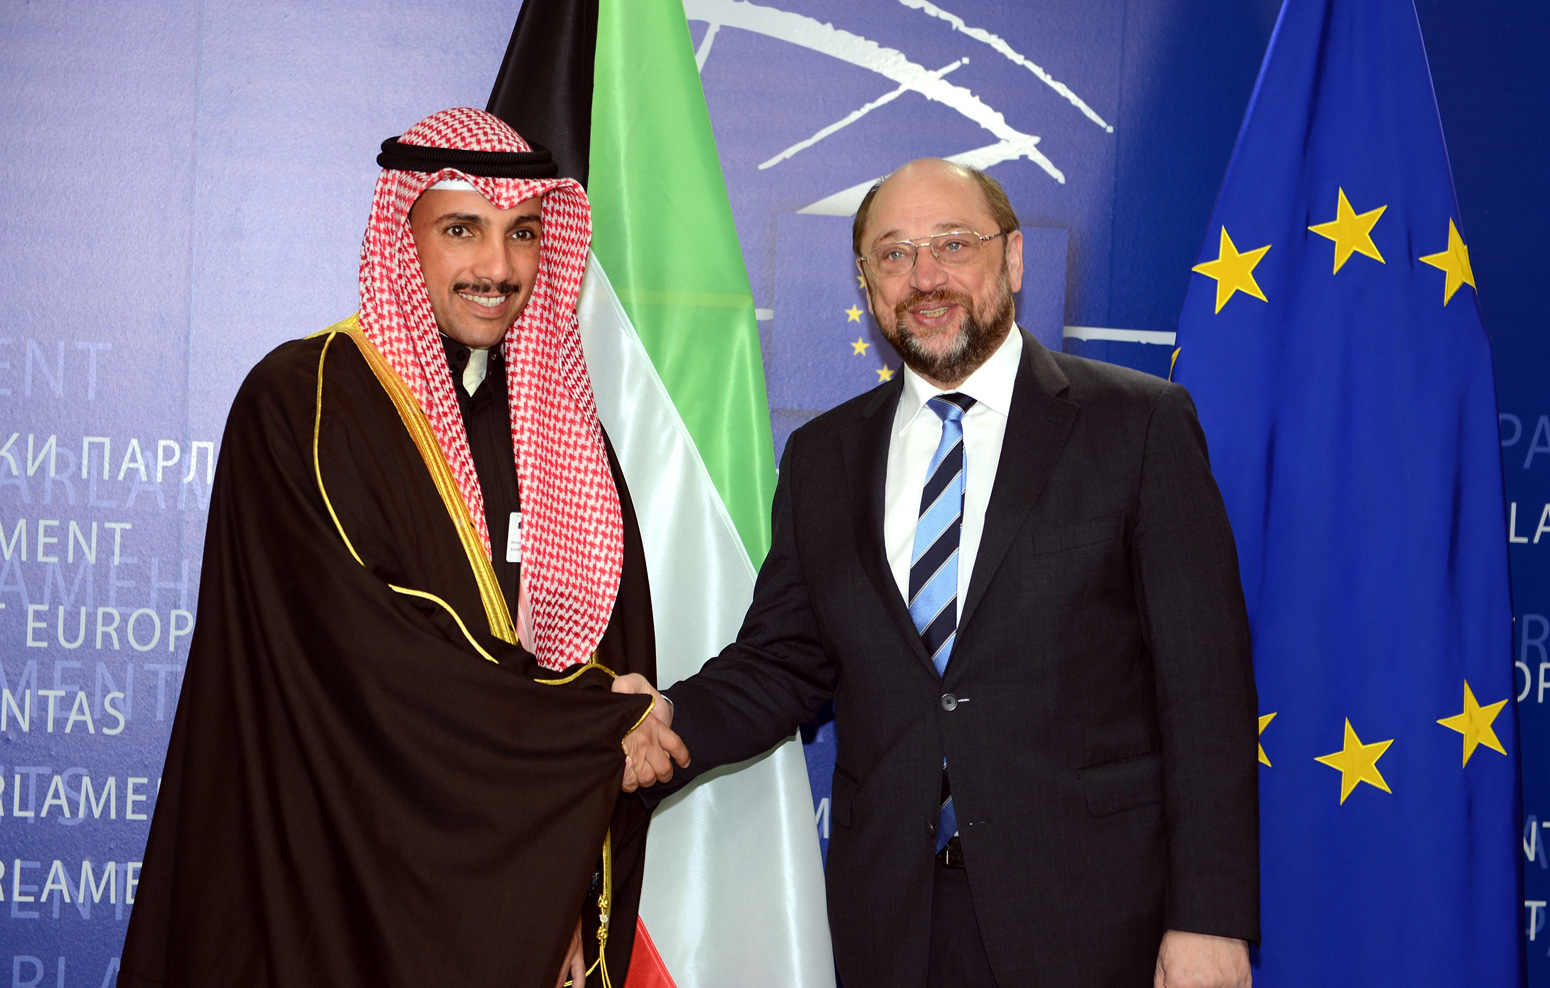 Kuwait's National Assembly (Parliament) Speaker Marzouq Al-Ghanim meets the President of the European Parliament Martin Schulz